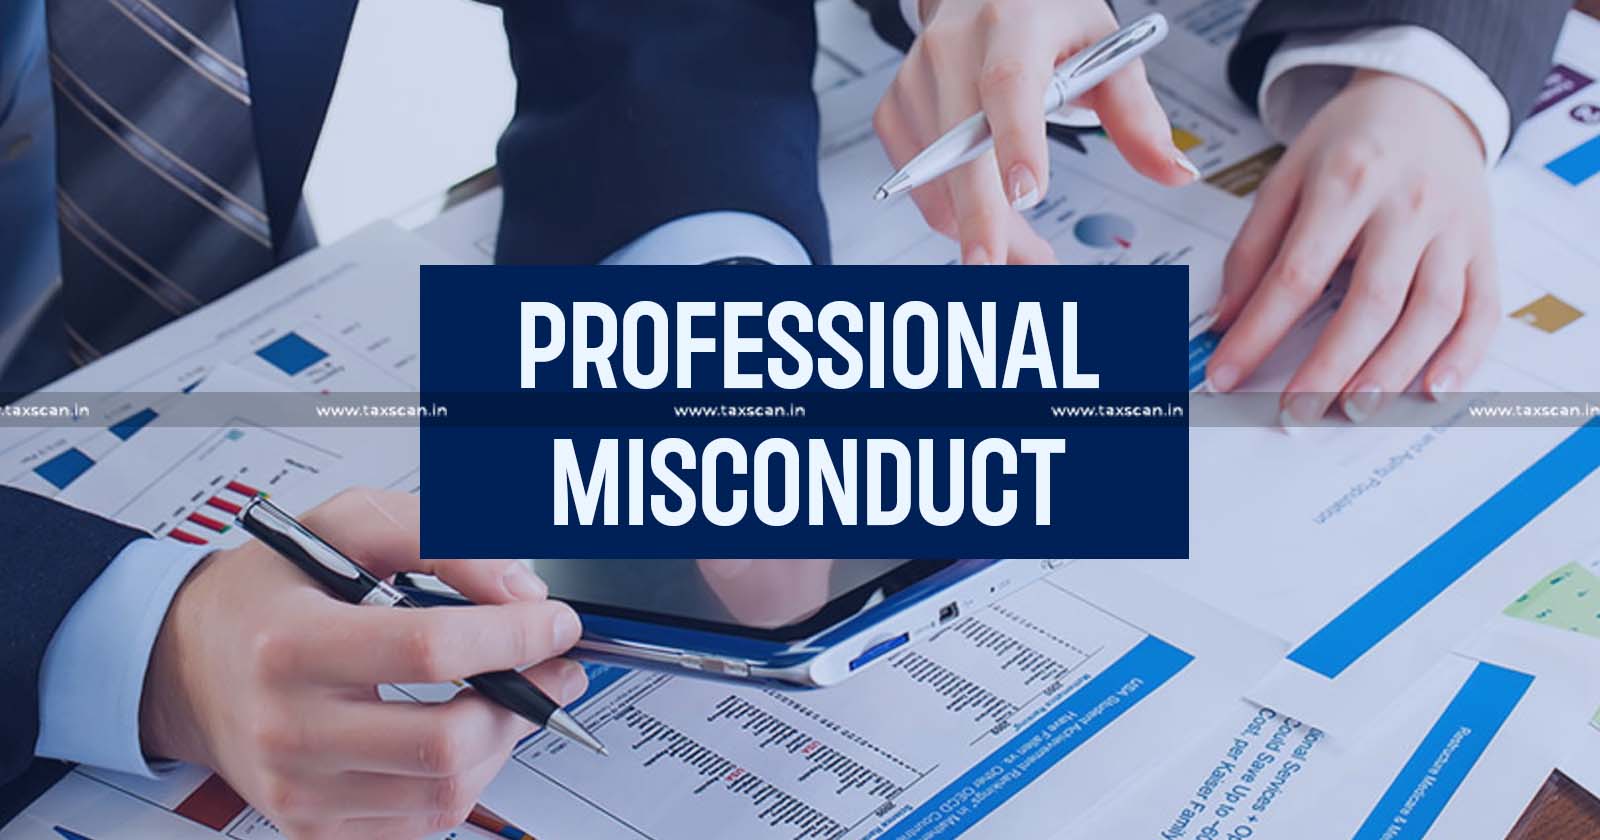 Incorporation - 20 Companies - Same Address - Set of Directors-ICAI Disciplinary Committee - CA Guilty - Professional Misconduct - taxscan